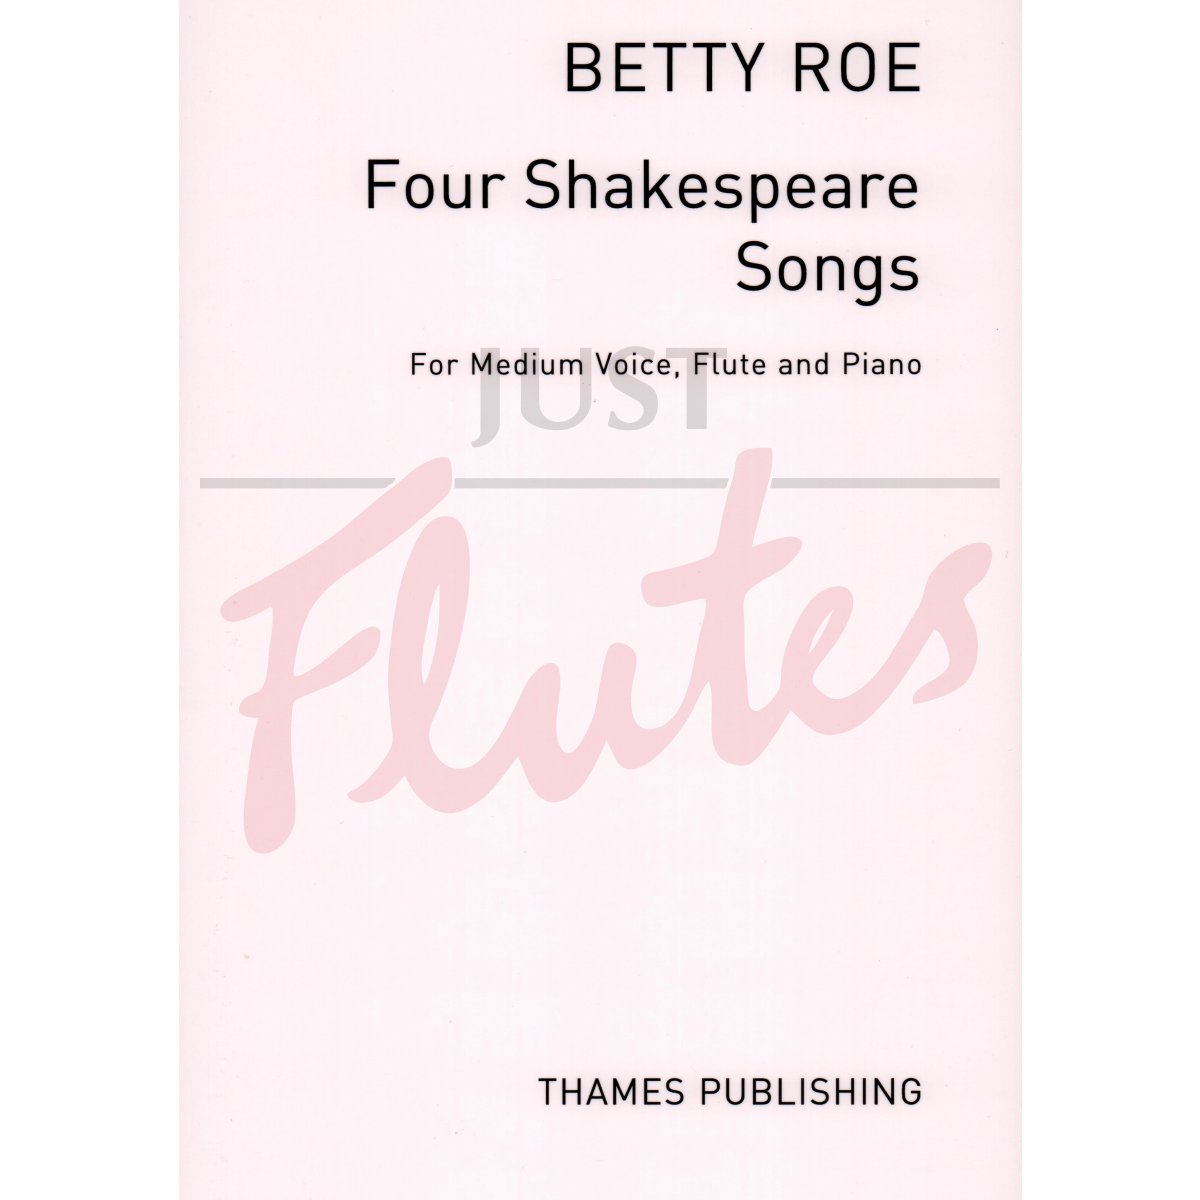 Four Shakespeare Songs for Medium Voice, Flute and Piano